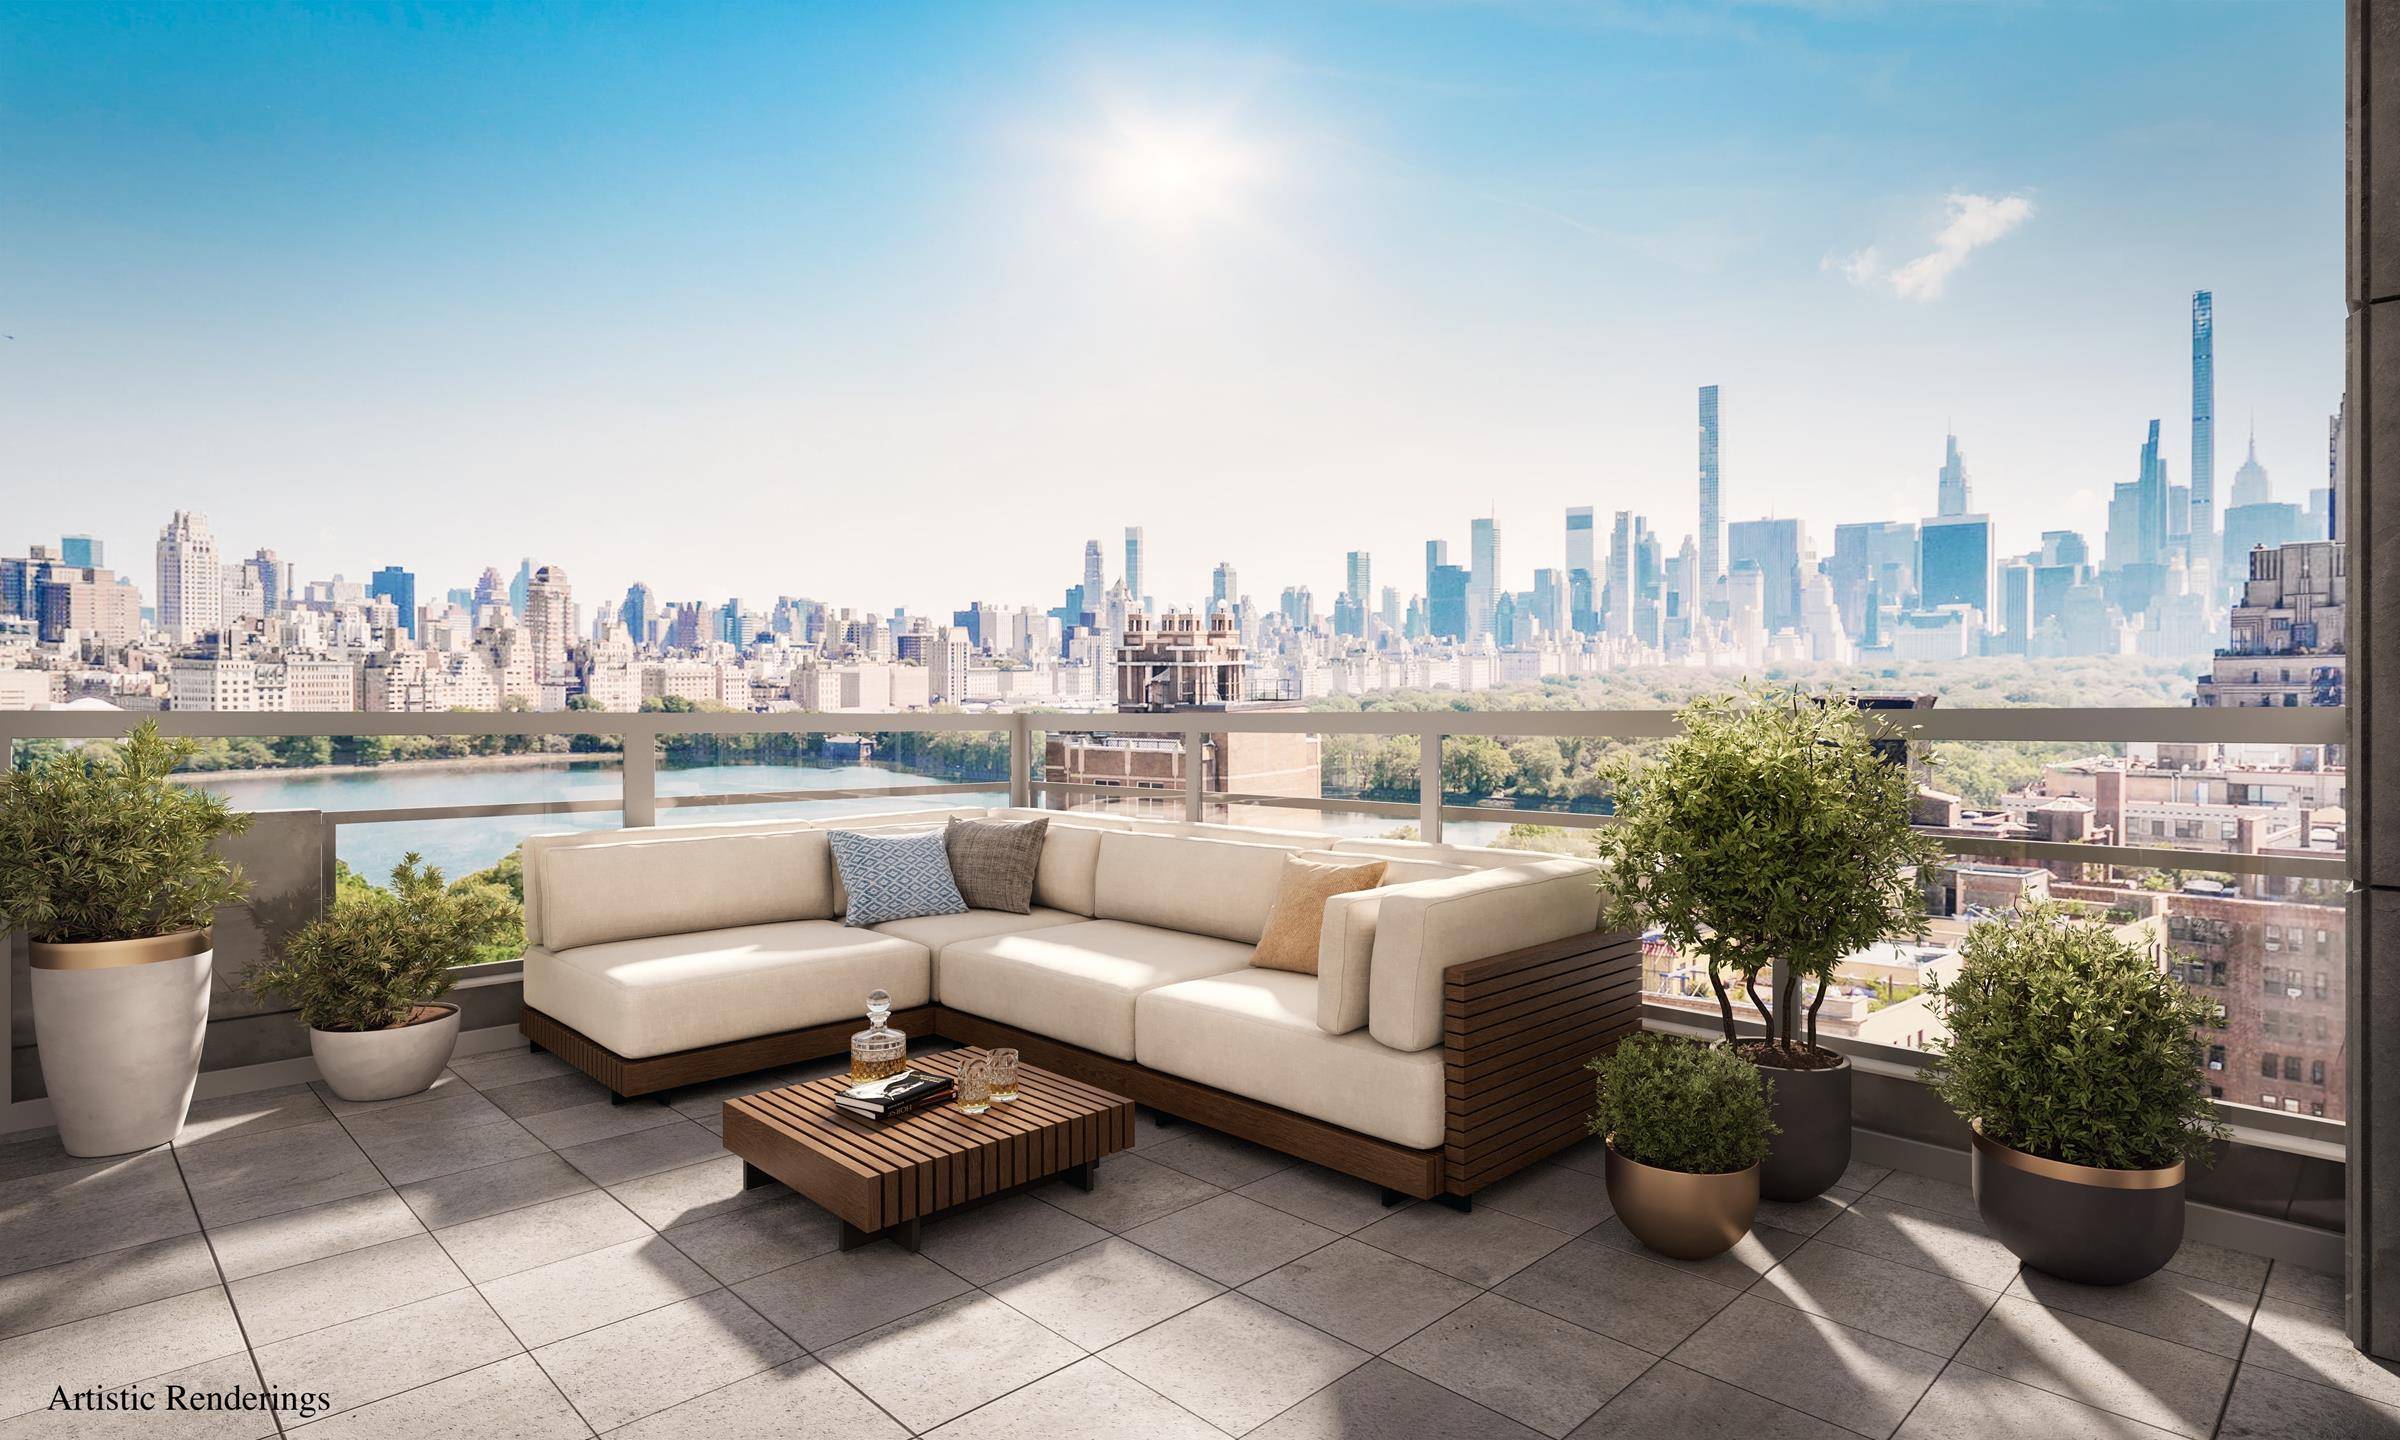 Introducing The Crown Jewel of 15 West 96th Street The Five Bedroom Duplex PenthousePresenting the Duplex Penthouse the one and only five bedroom residence at 15 West 96th Street.